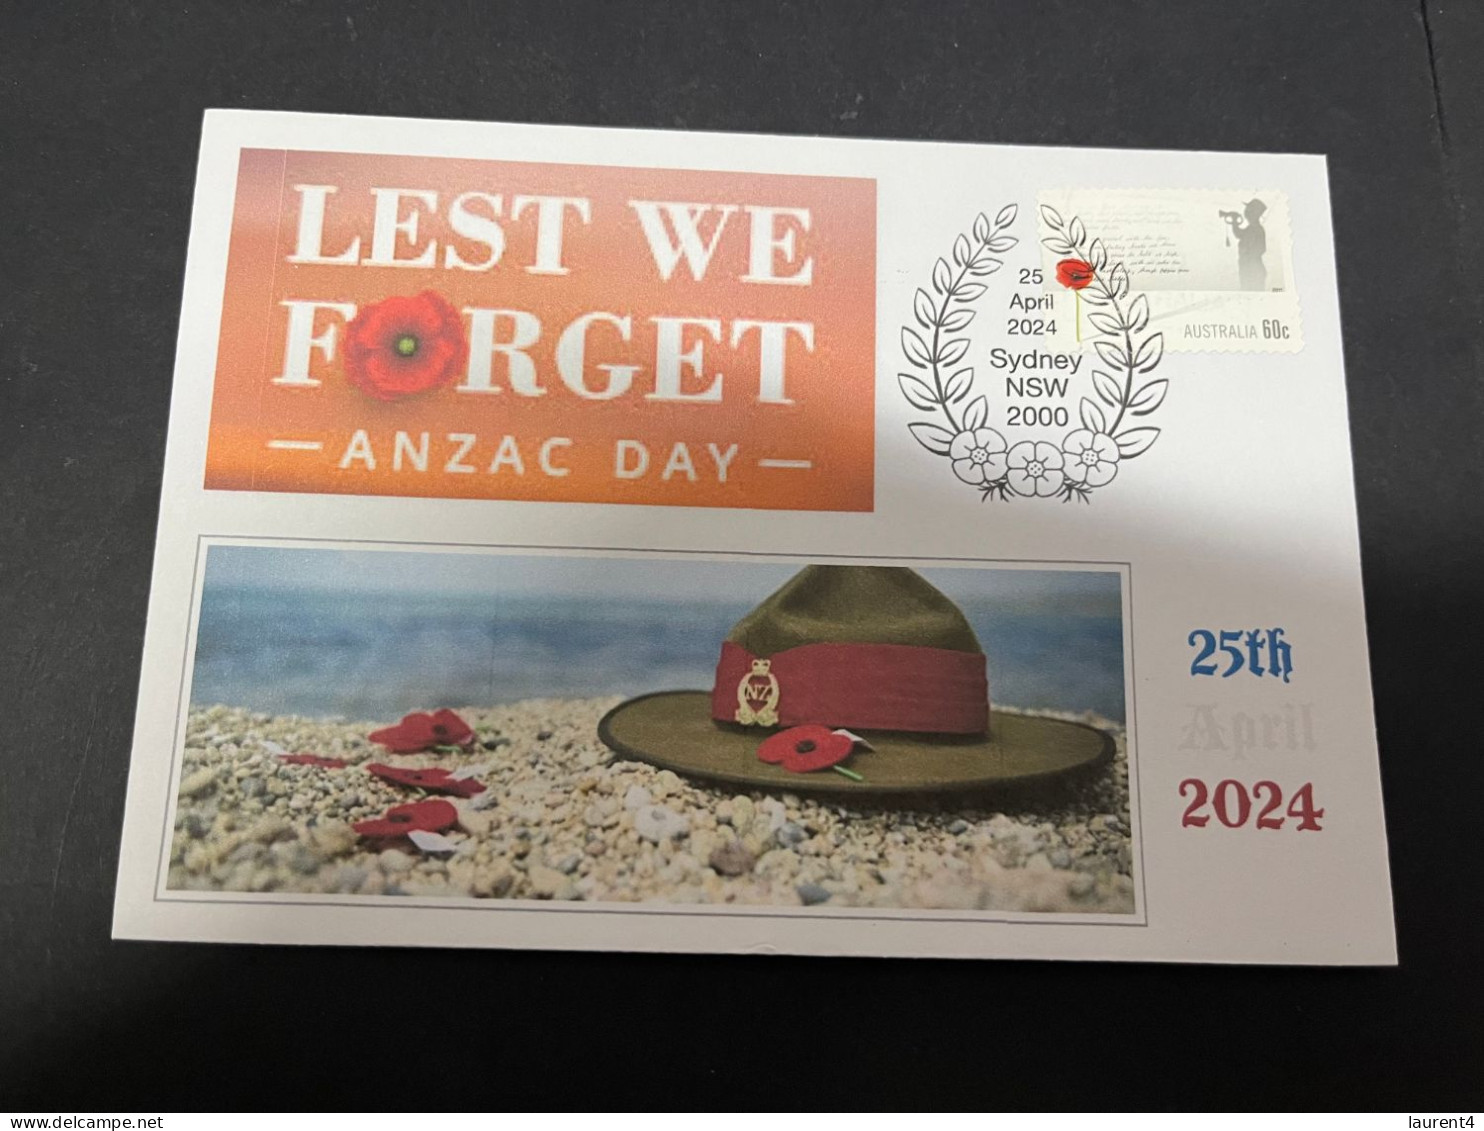 24-4-2024 (2 Z 52) Australia ANZAC 2024 - Special Cover Postmarked 25 April 2024 (Let's We Forget NZ Hat) - Militares